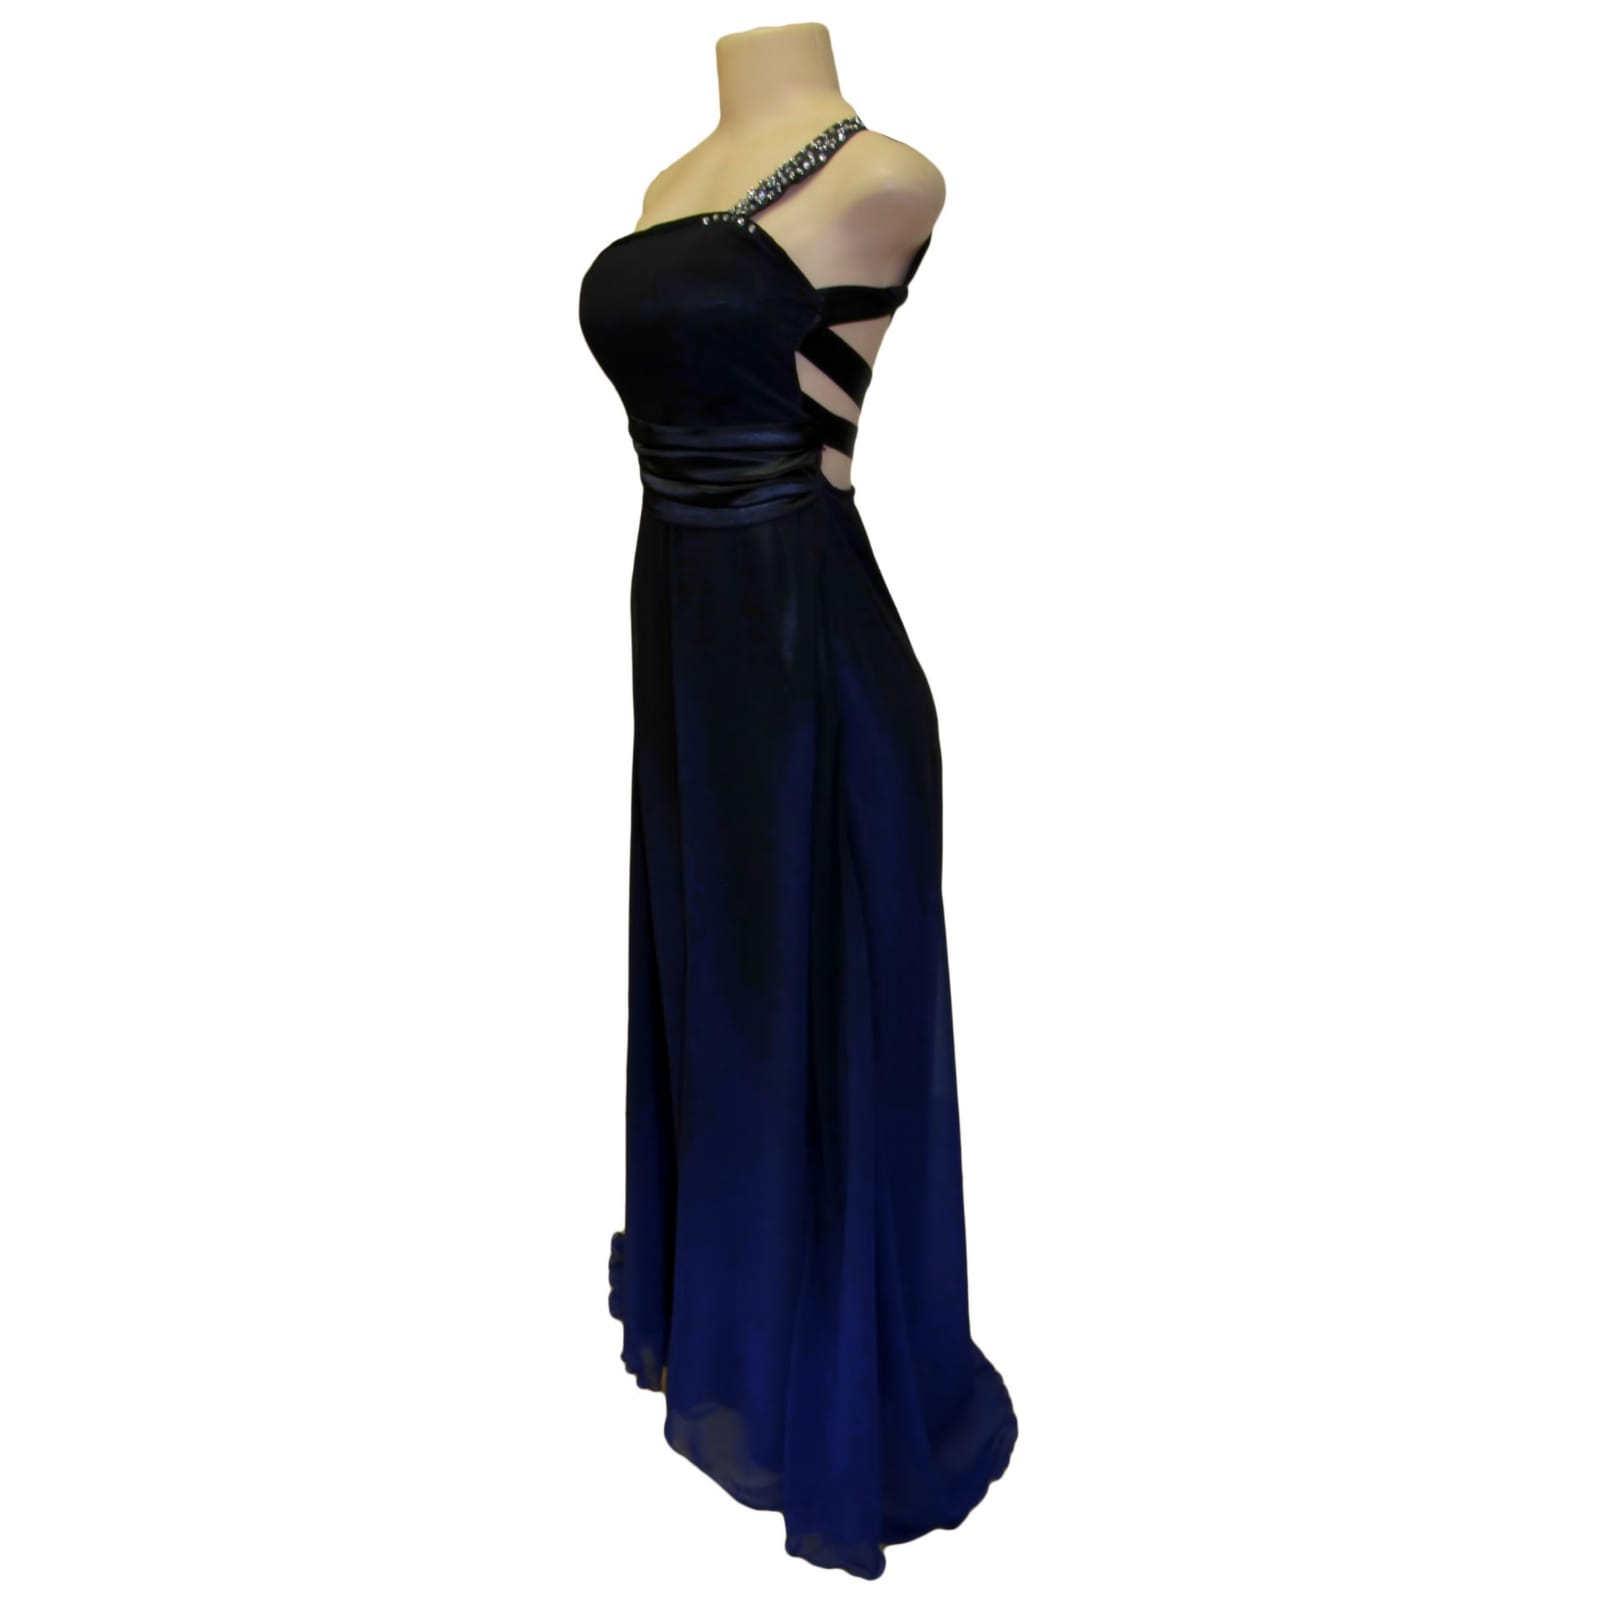 Black and royal blue flowy prom dress with a wide waist band 6 black and royal blue flowy prom dress with a wide waist band, an open back with strap design. With a train and silver detailing.